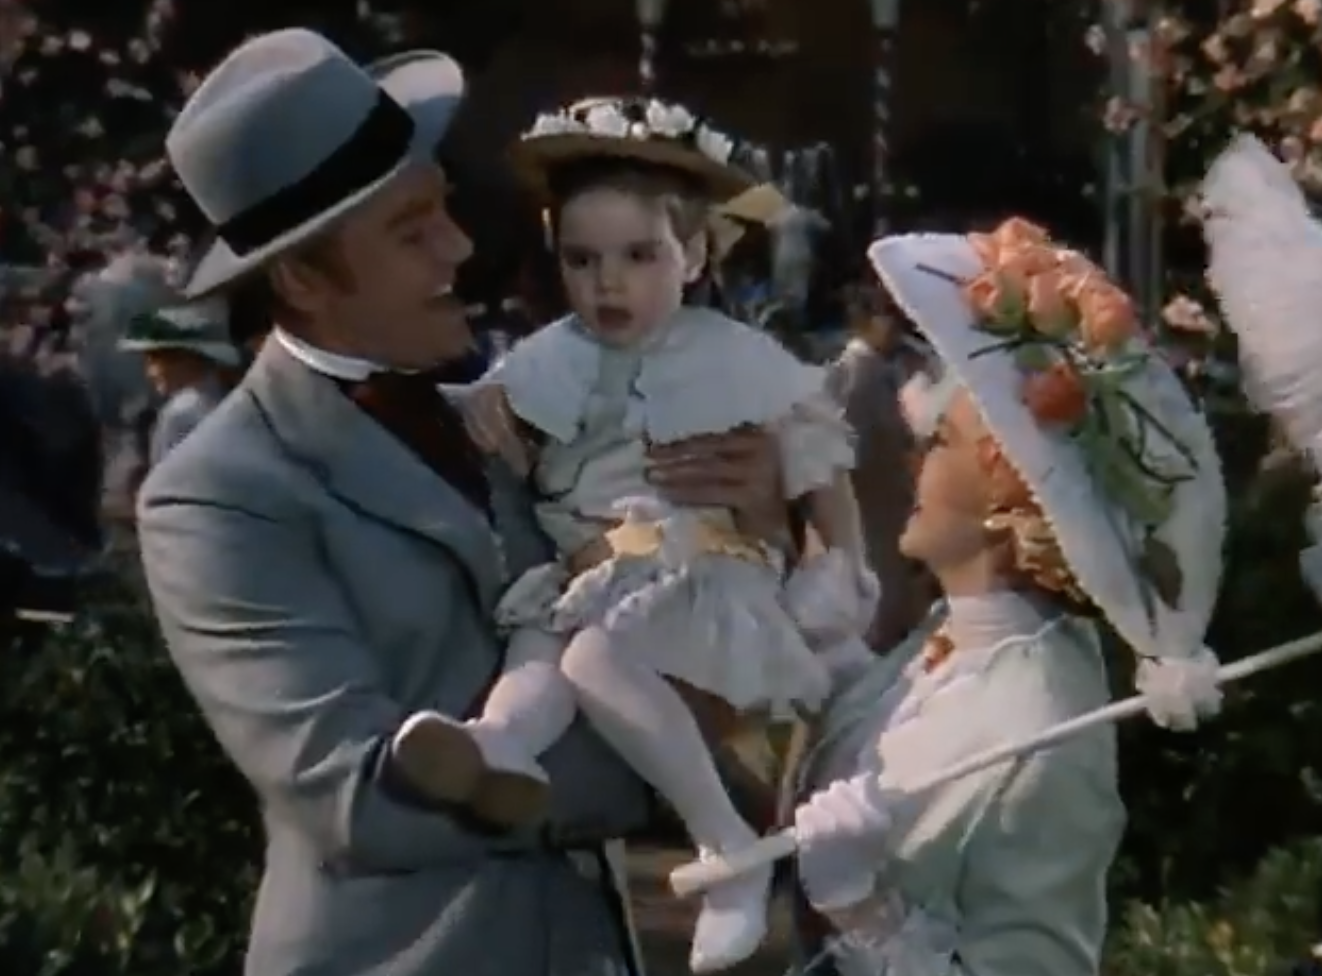 Garland holding a young Minnelli in light-colored dresses